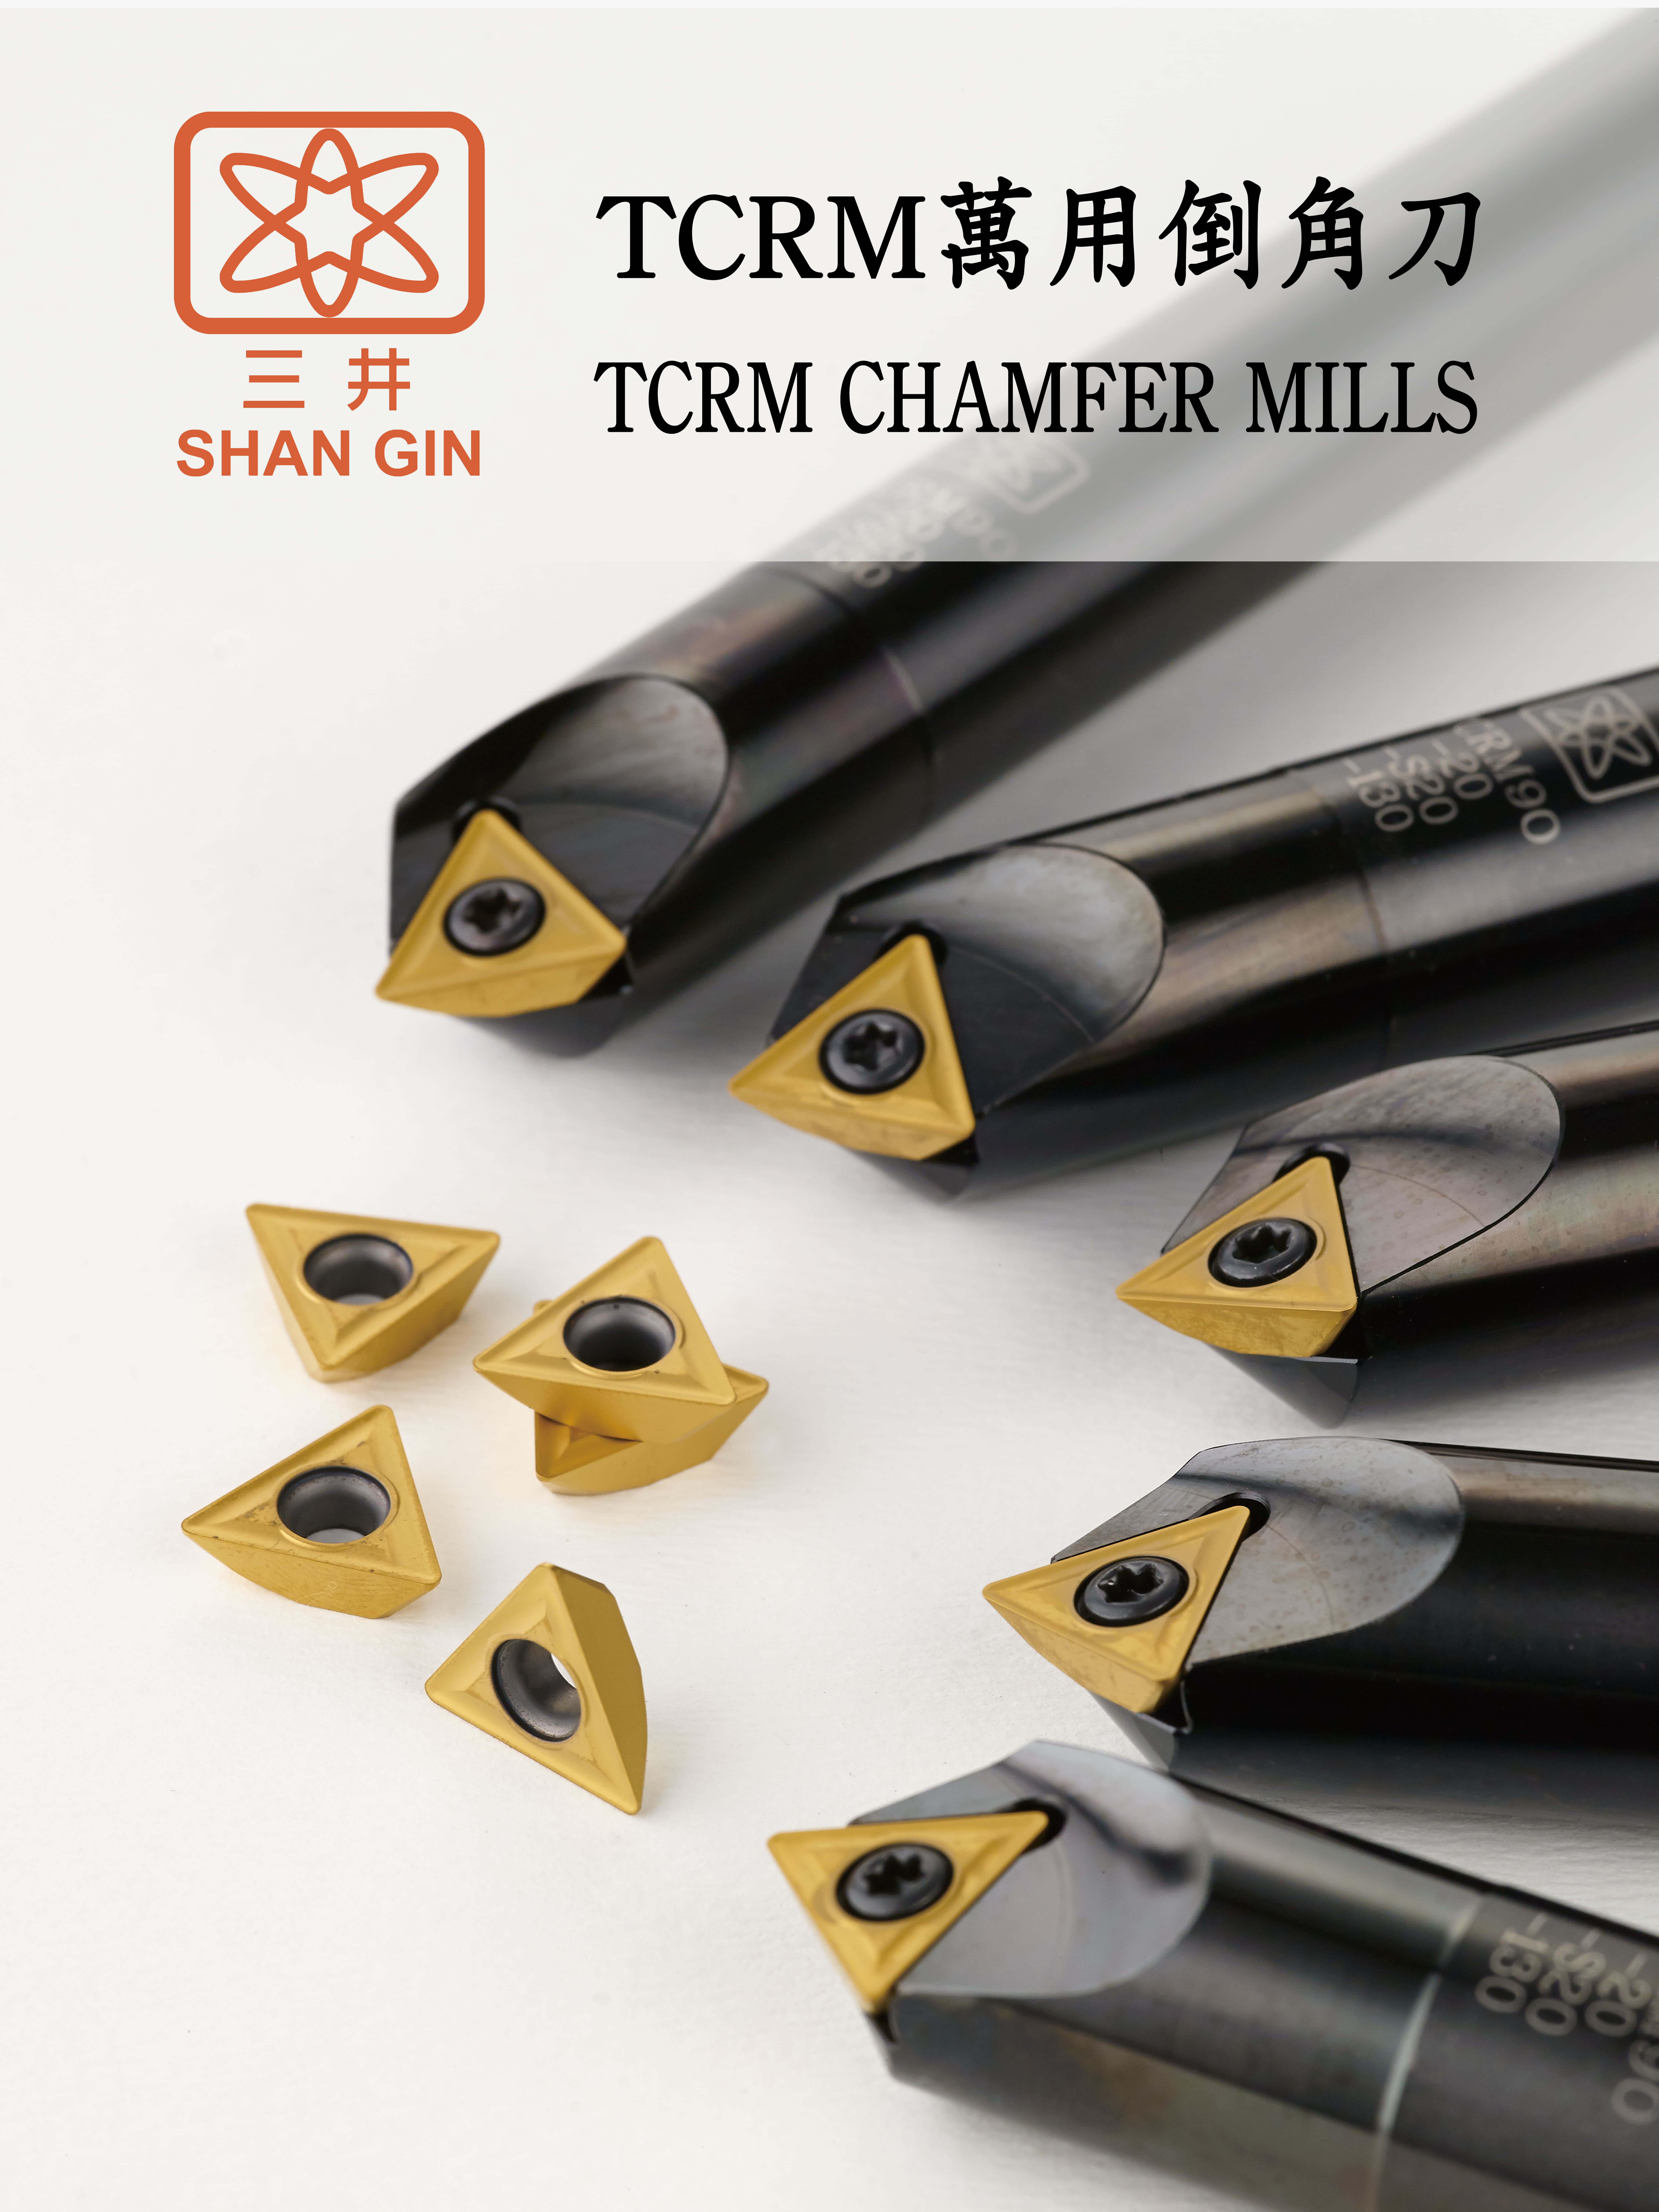 Products|TCRM CHAMFER MILLS